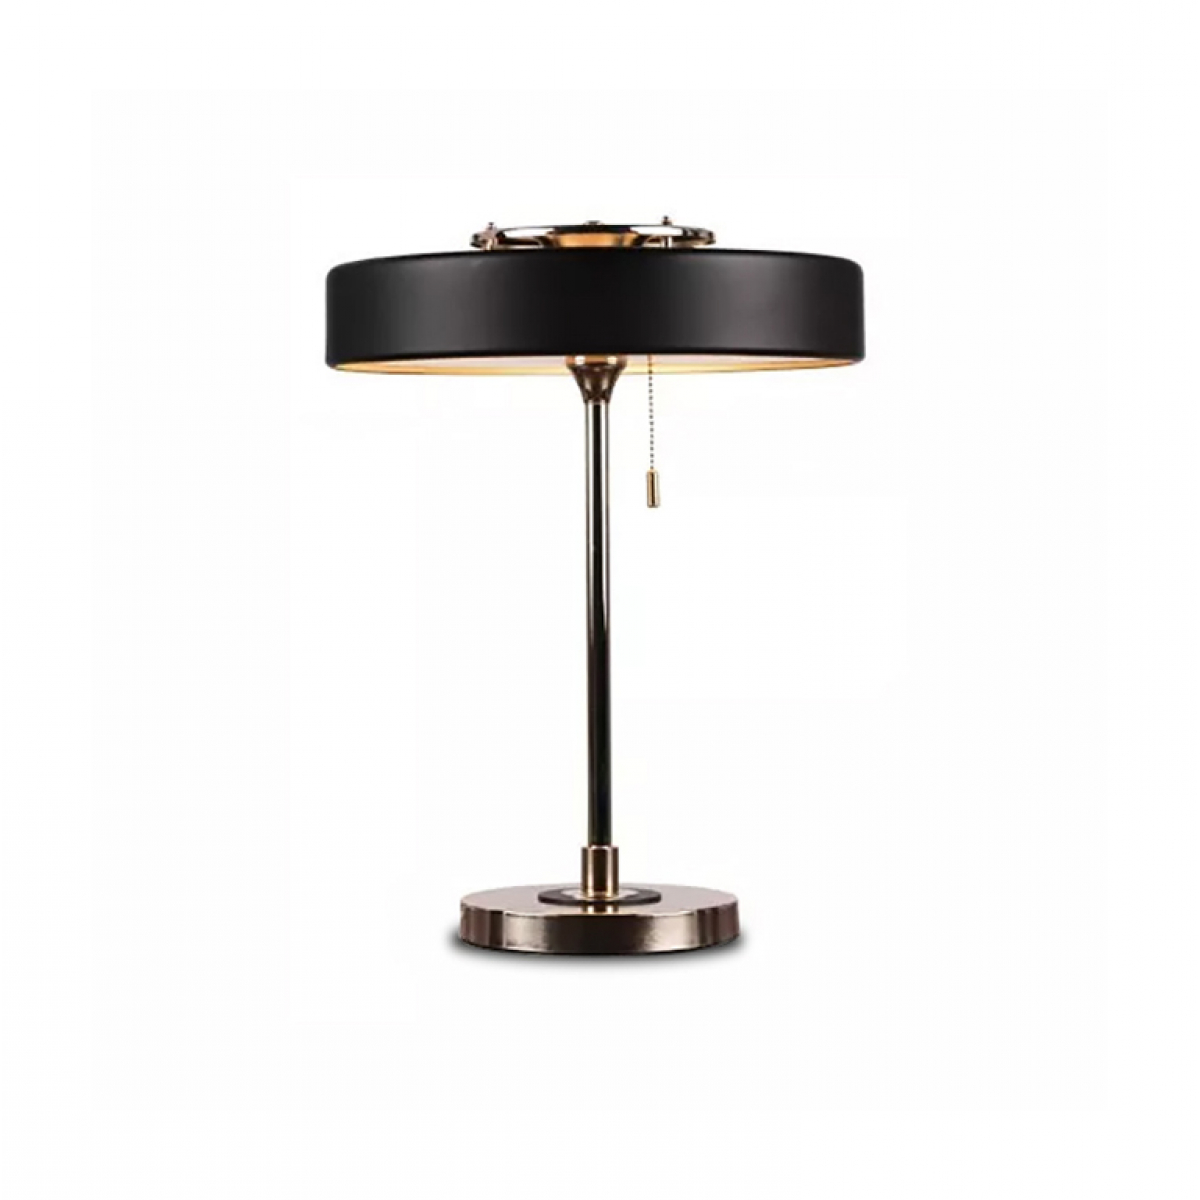 DISC TABLE LAMP